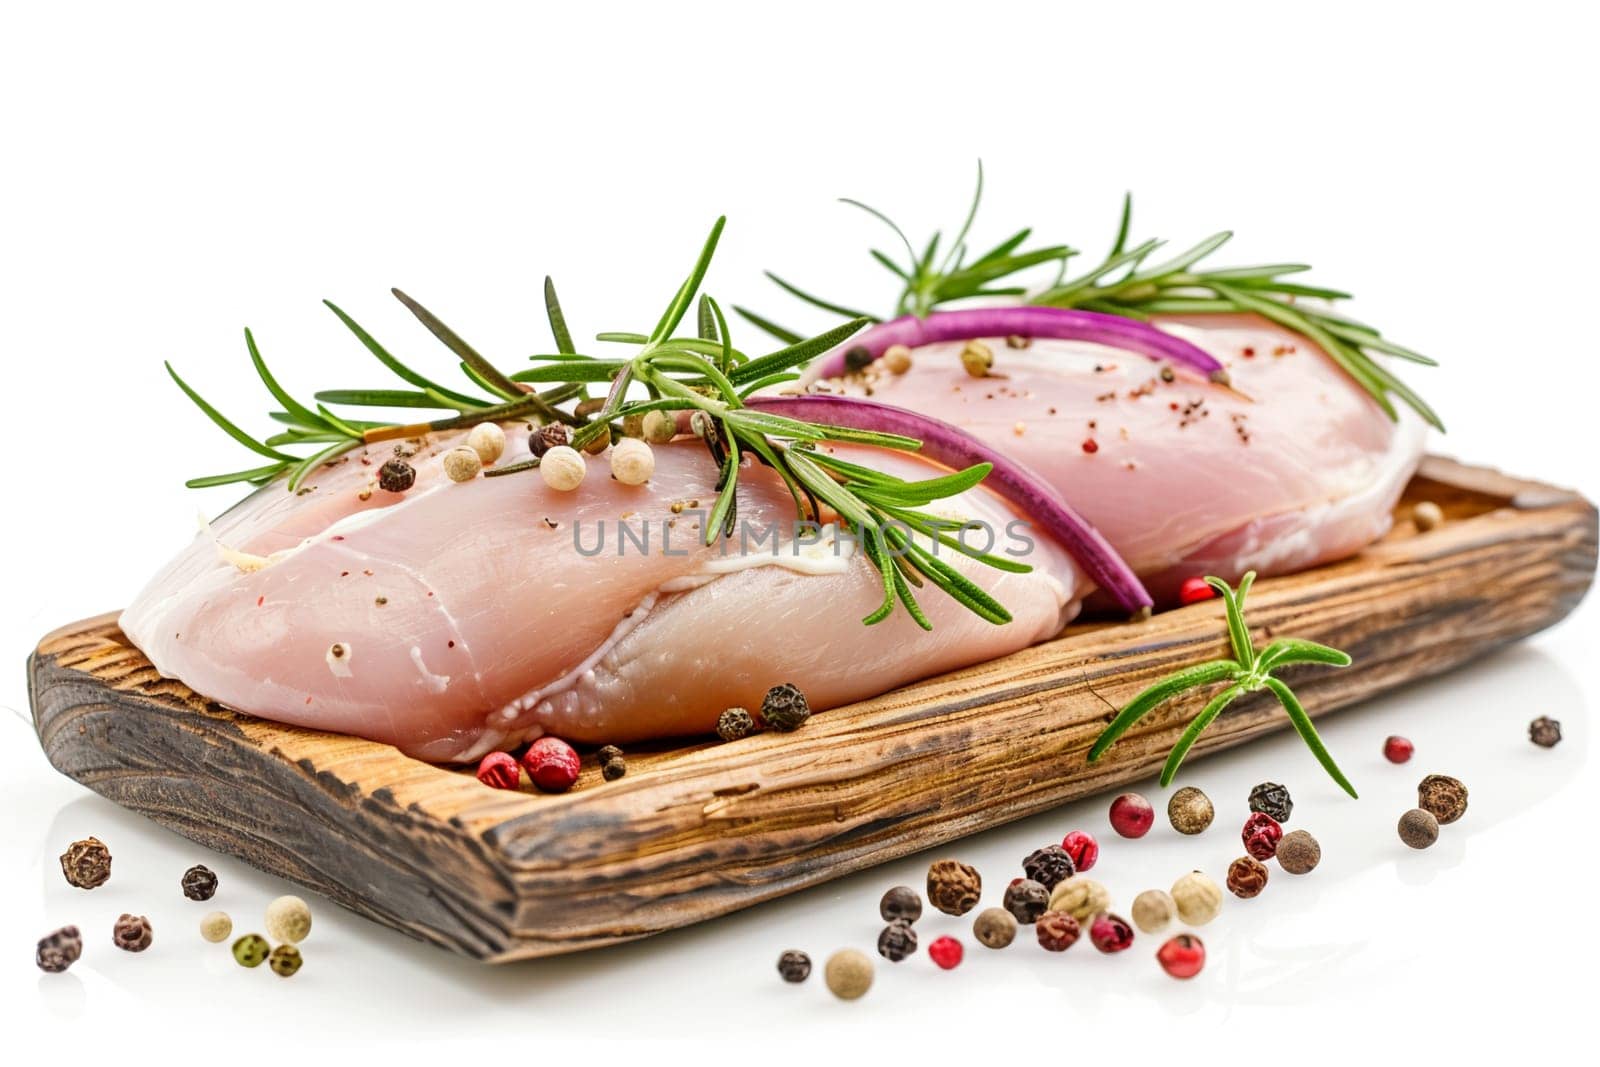 High-quality image features fresh chicken breasts seasoned red onion rosemary pepper. Perfect for showcasing ingredients used gourmet healthy meals.